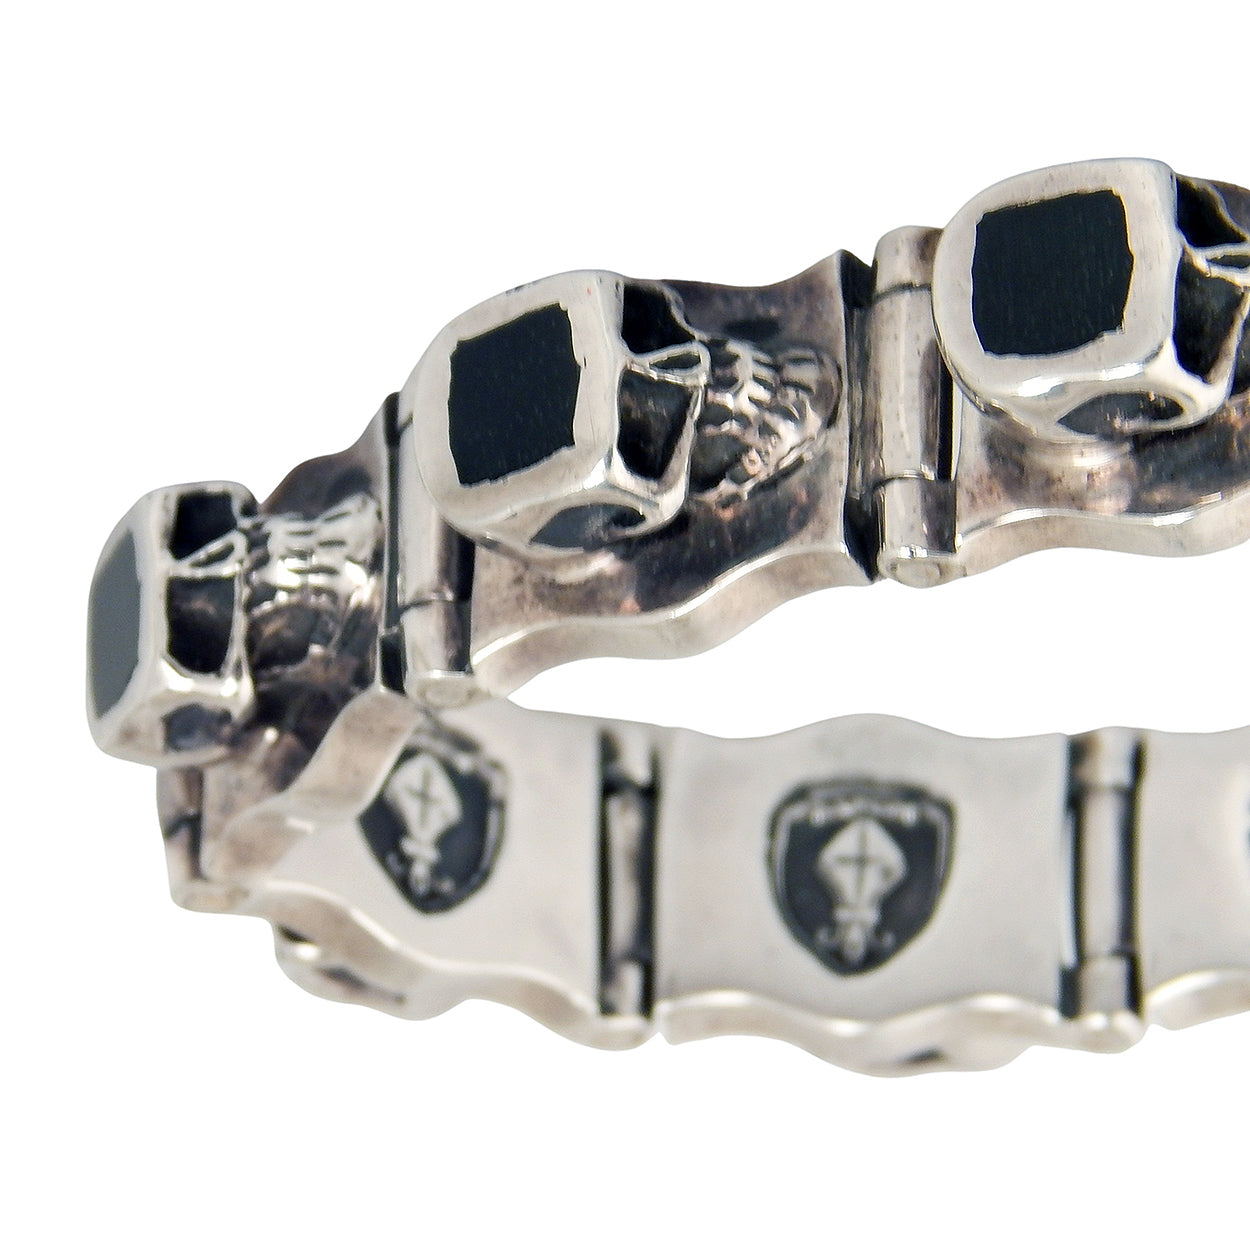 MARCOS - &quot;SKULL&quot; Limited Edition Bracelet in Sterling Silver and Ebony Wood